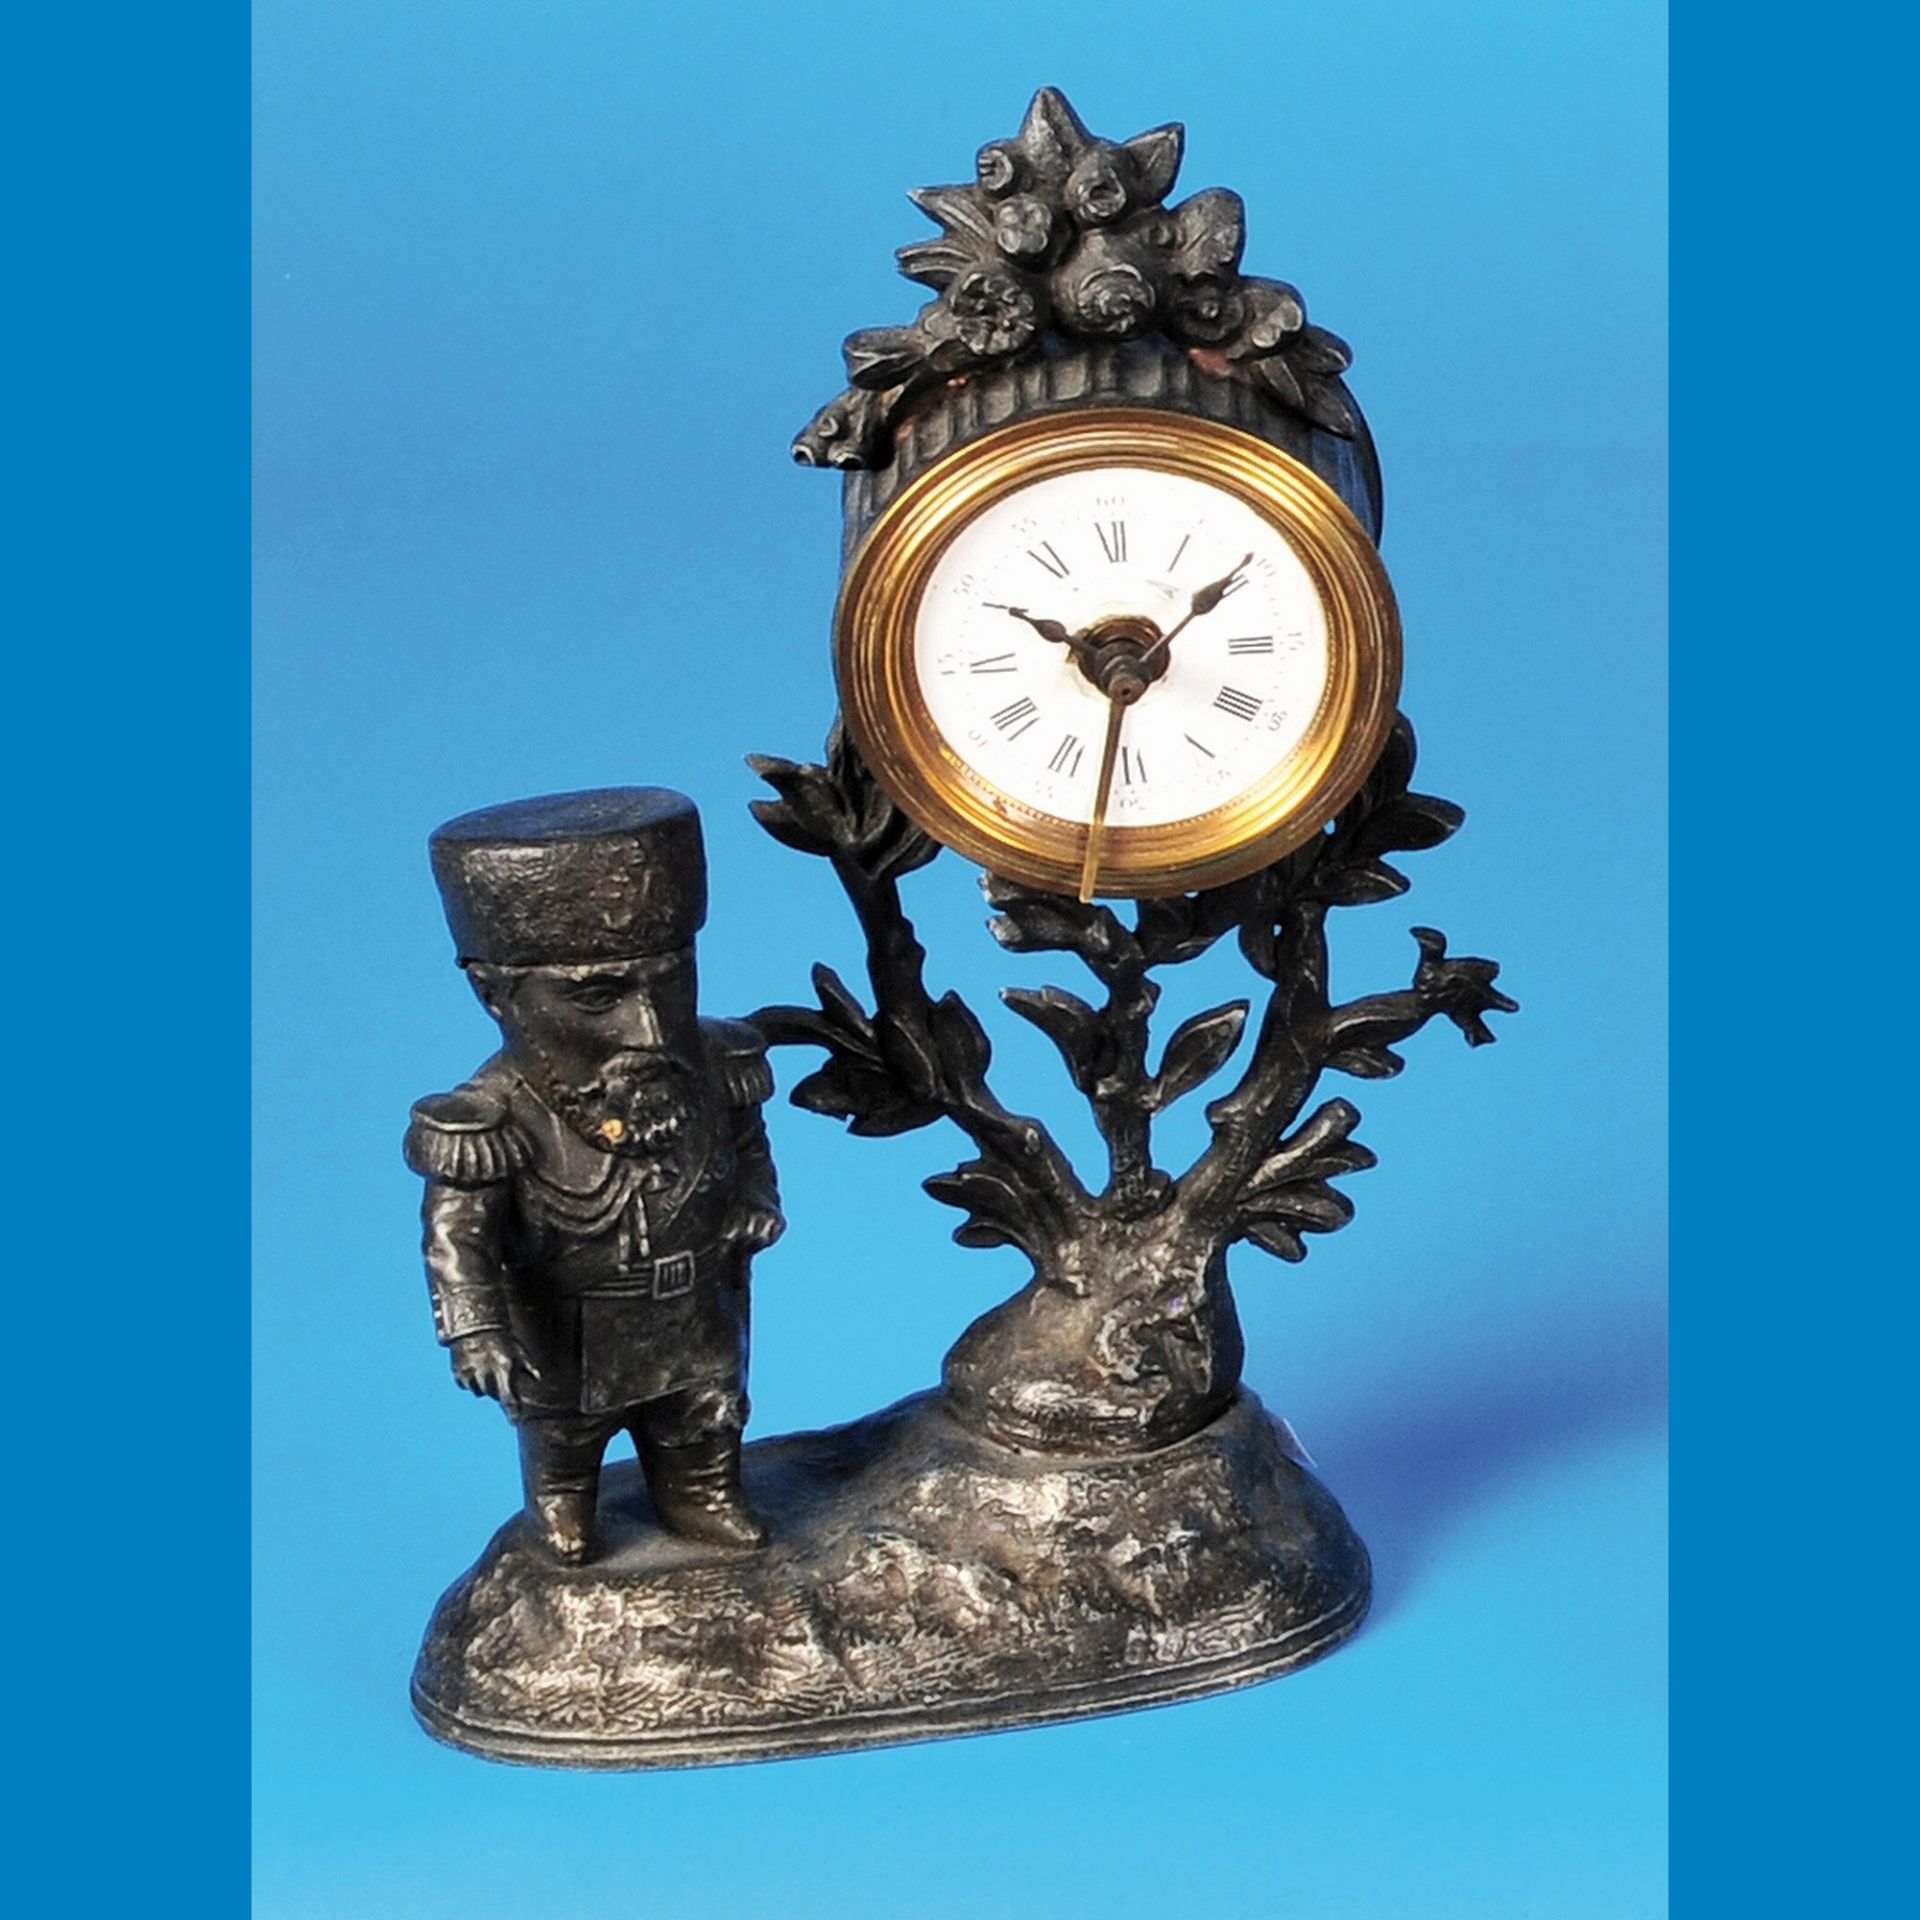 Peldulum alarm clock with russian officer with fold-out headgear